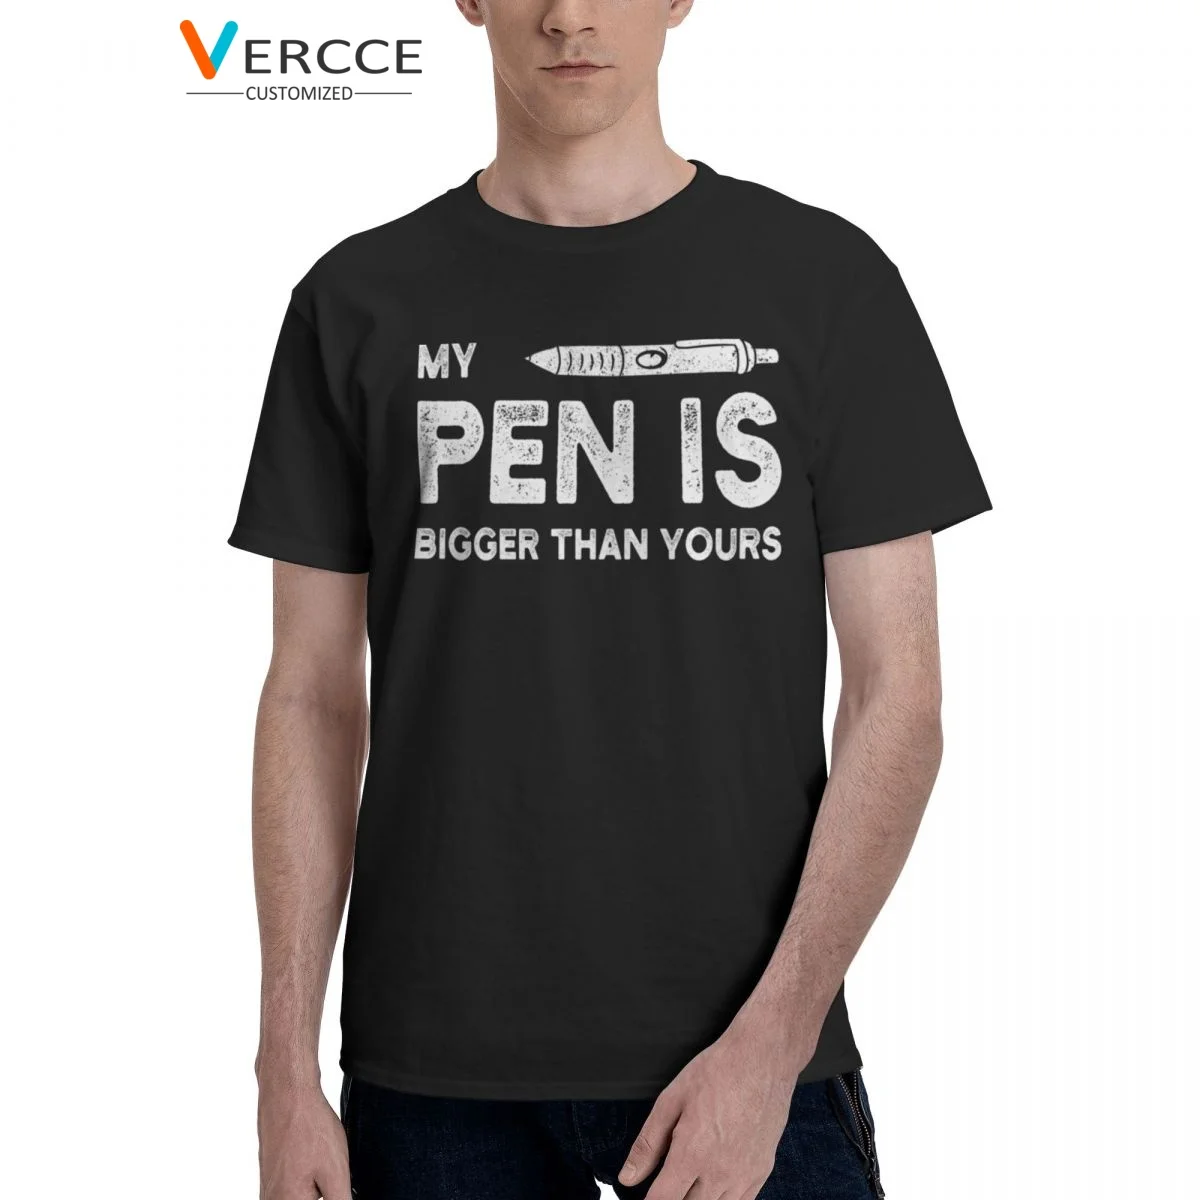 

My Pen Is Bigger Than Yours Retro T Shirt Cotton High Quality Tees Short Sleeve Clothing Tshirts For Men Women Gift Idea